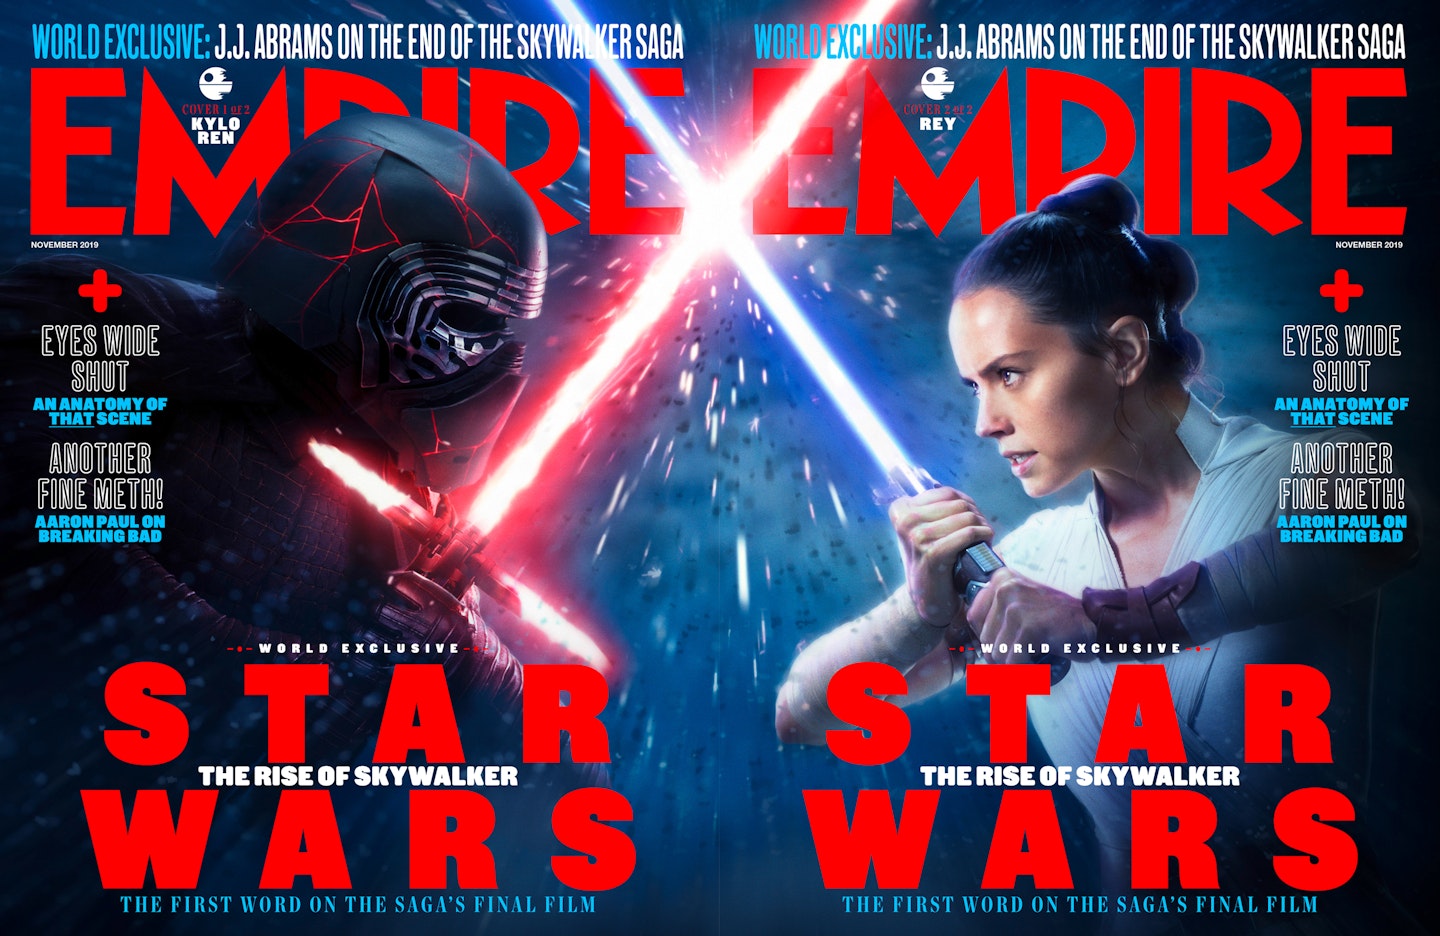 Empire – November 2019 – Star Wars The Rise Of Skywalker covers